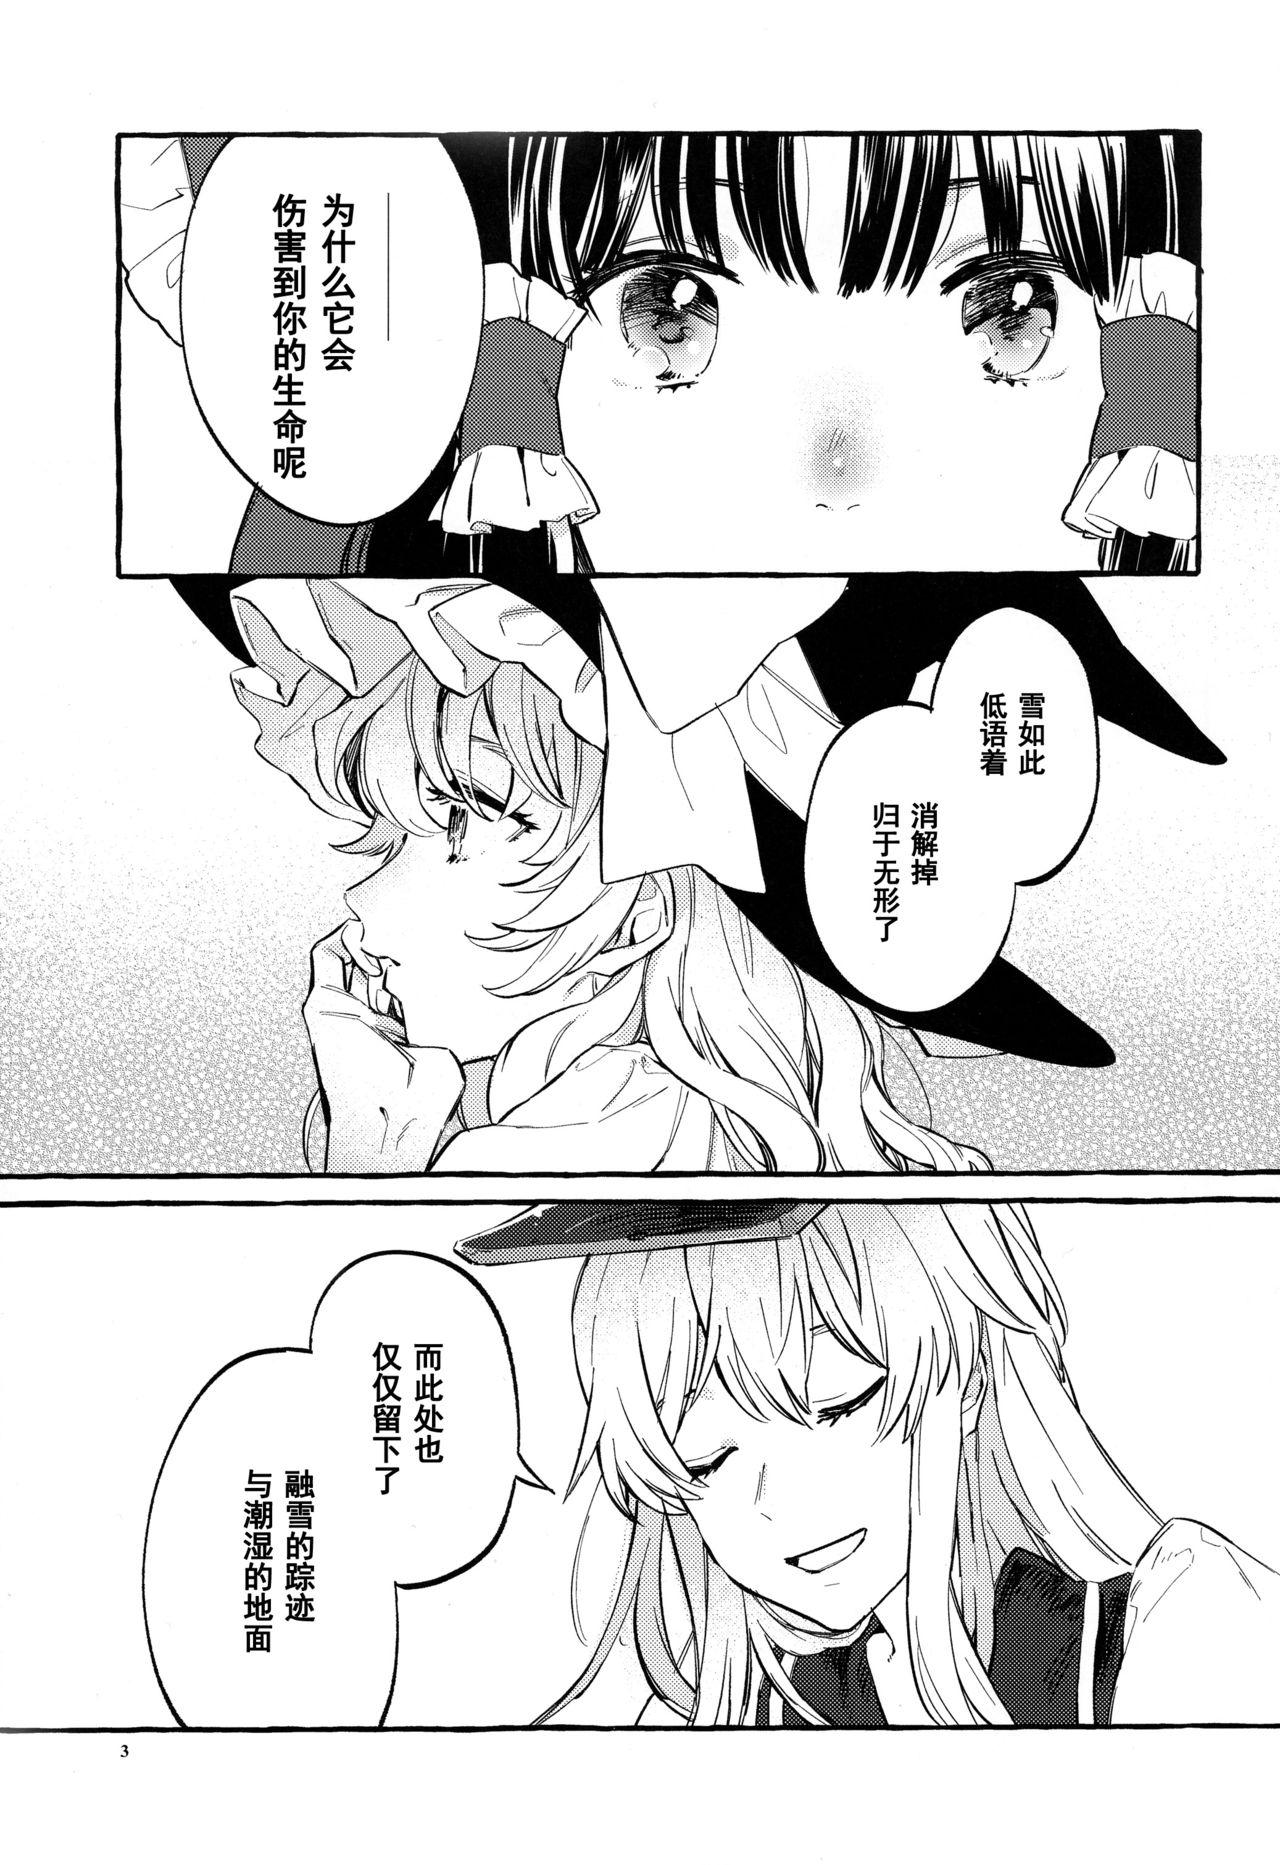 Missionary Porn Happy End Standard - Touhou project Butthole - Page 2